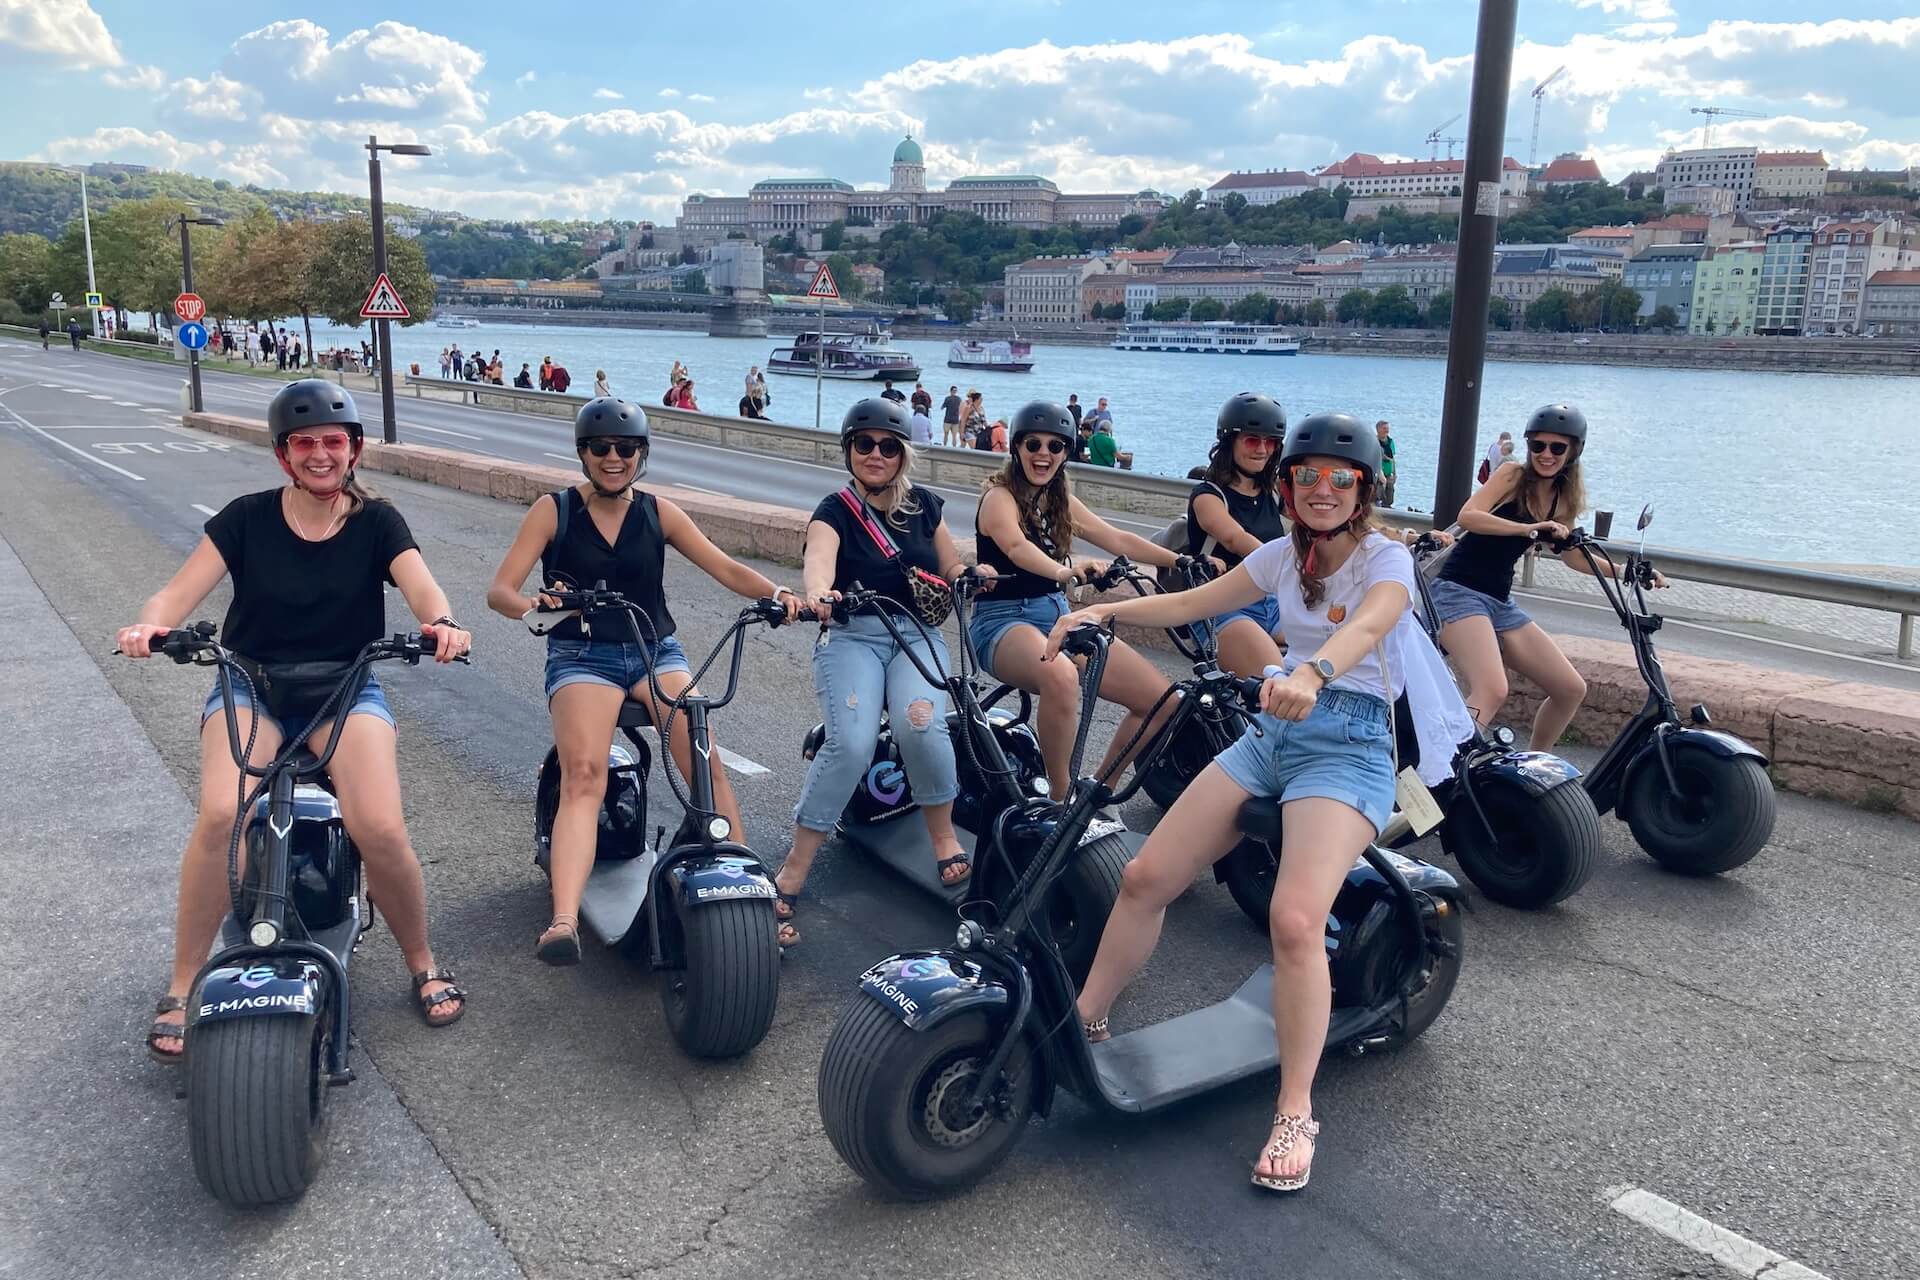 Ladies on E-Scooters on the Pest side of the Danube